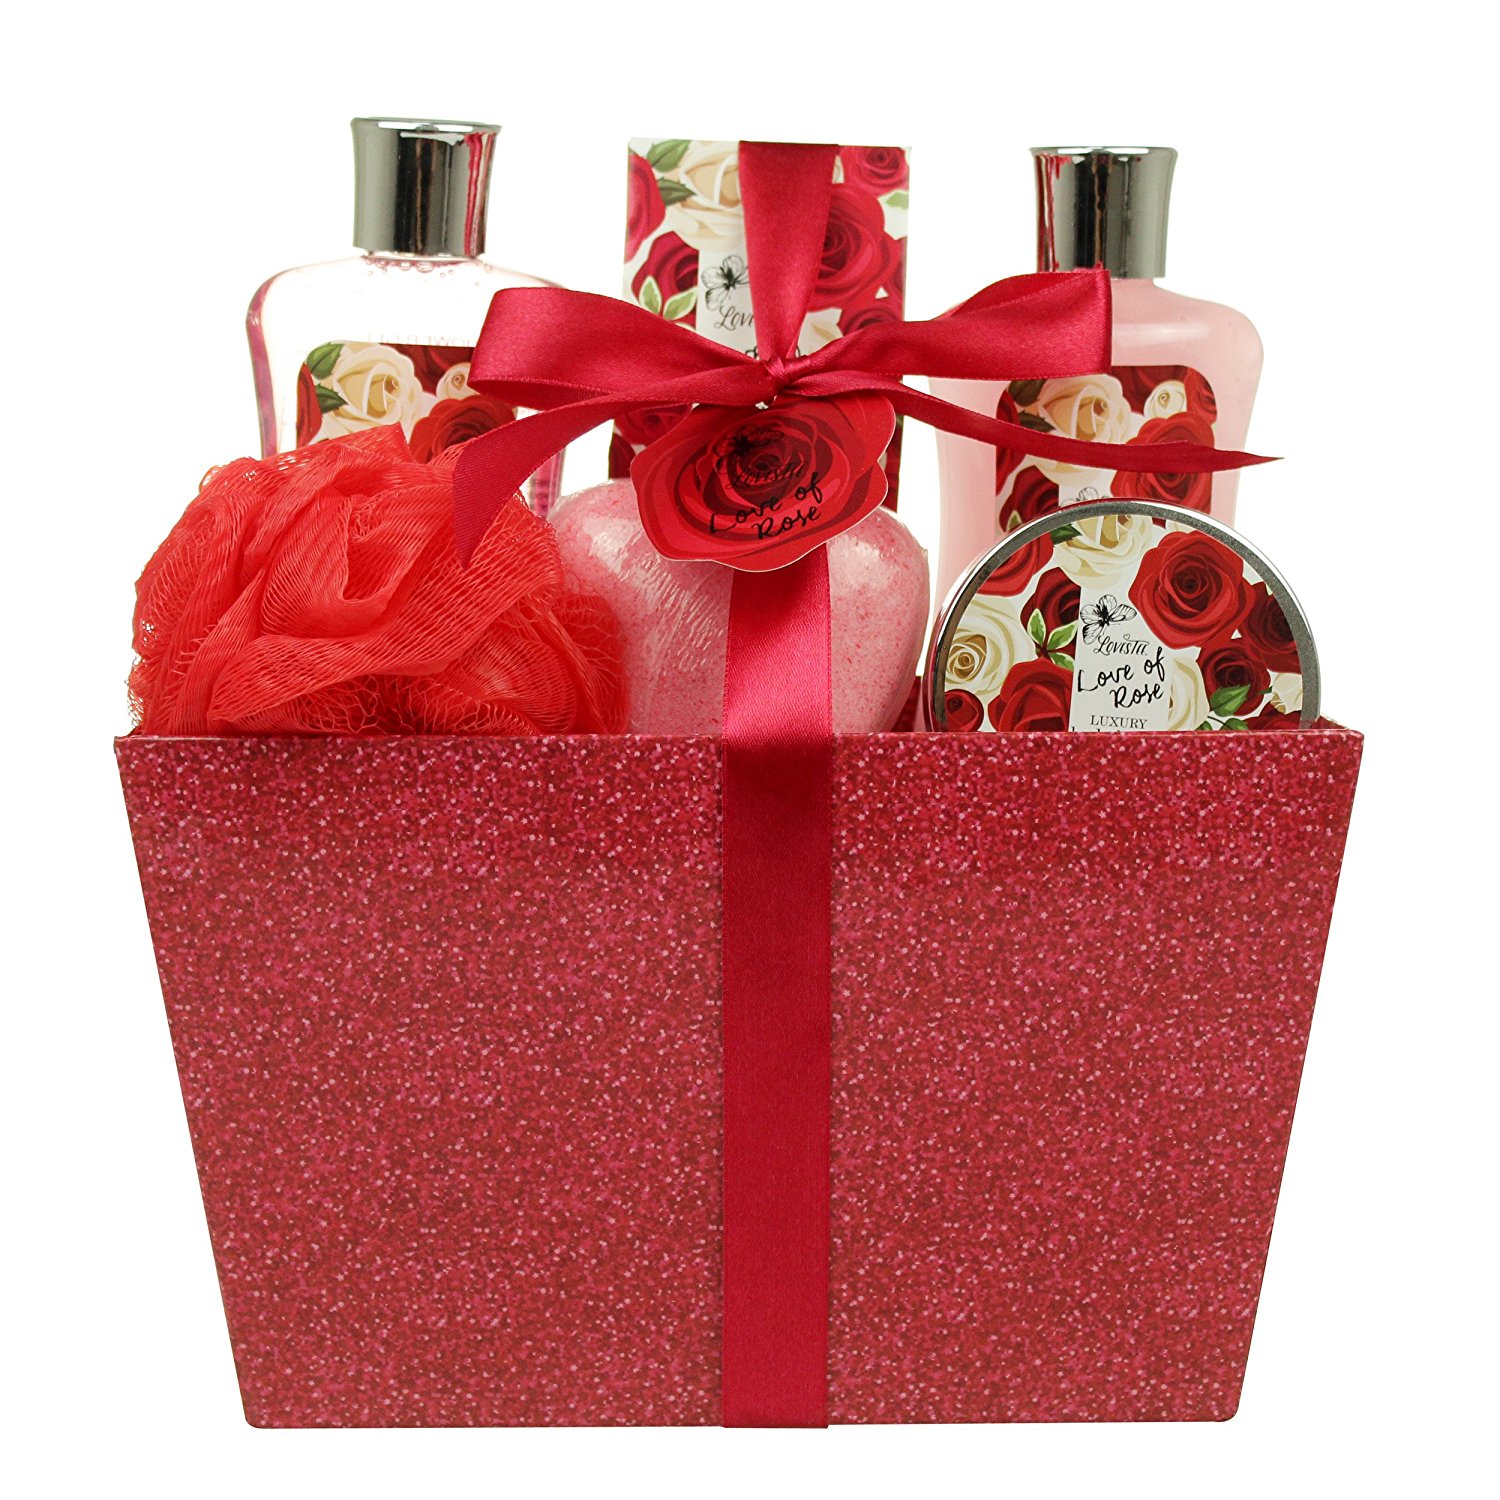 Amazon.com : Mothers Day Bath Gift Set - Spa Gift Basket with Love ...